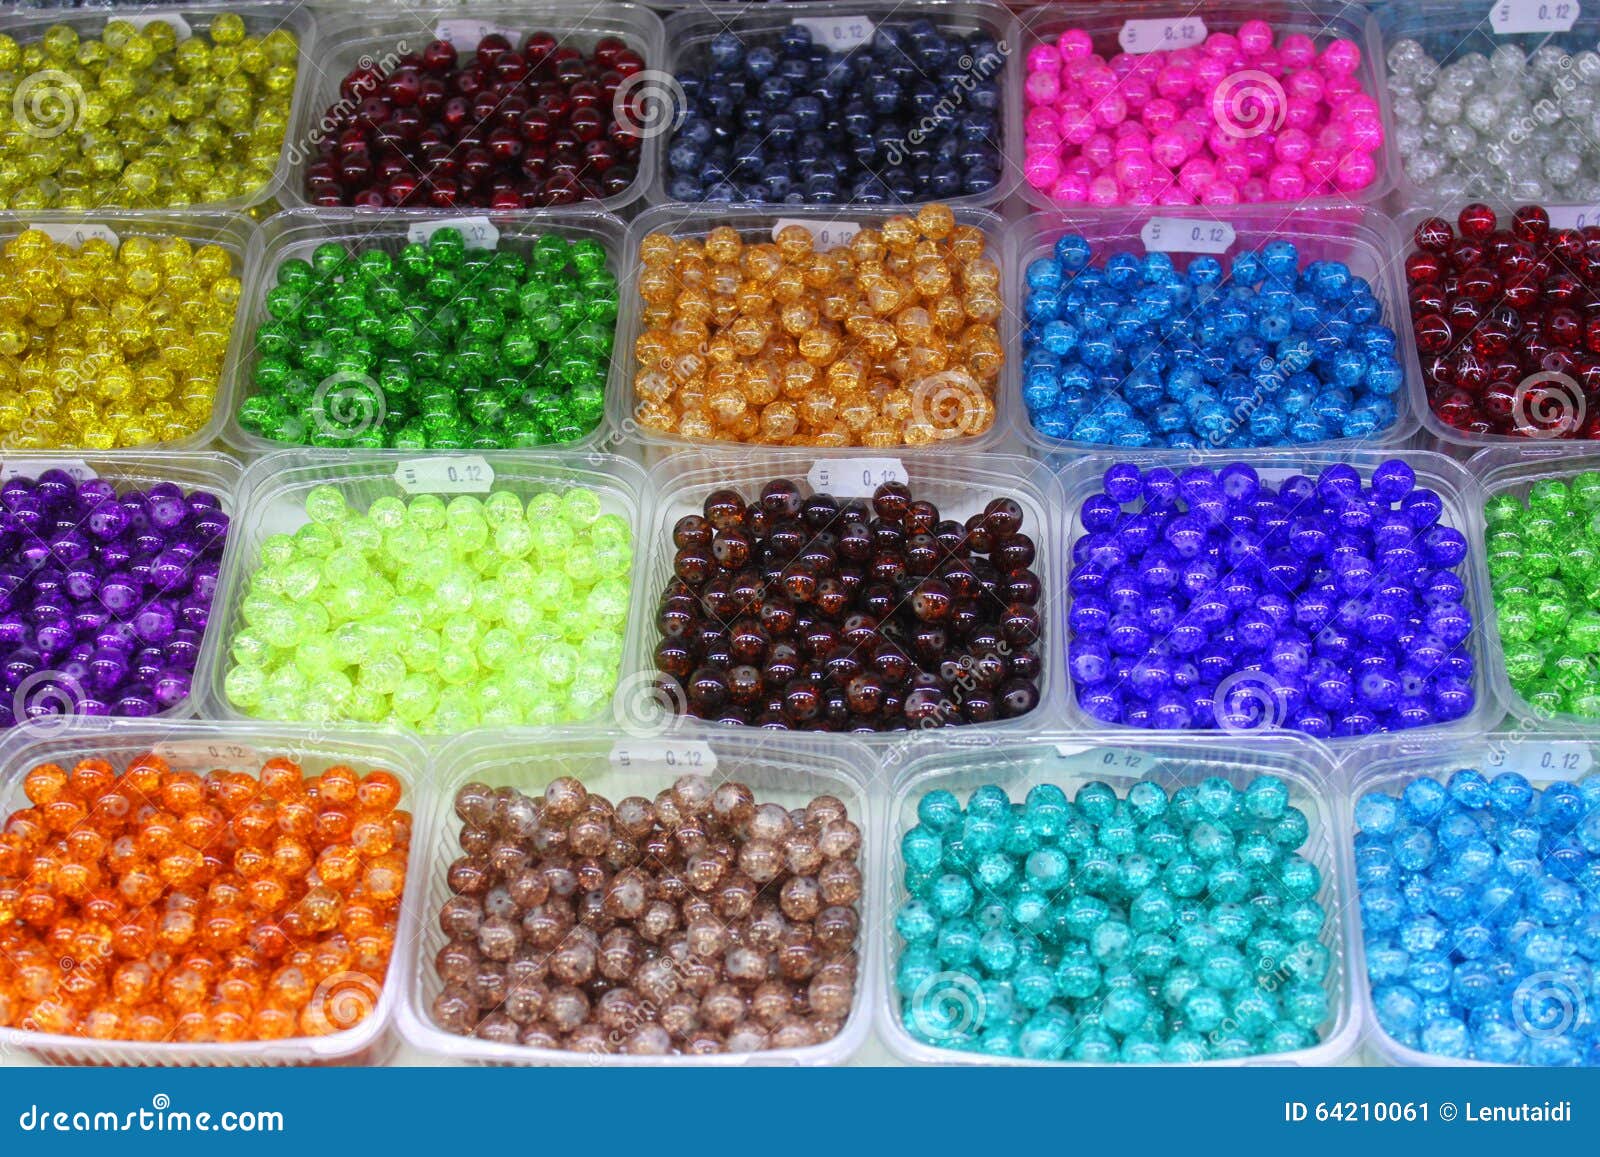 colored plastic beads